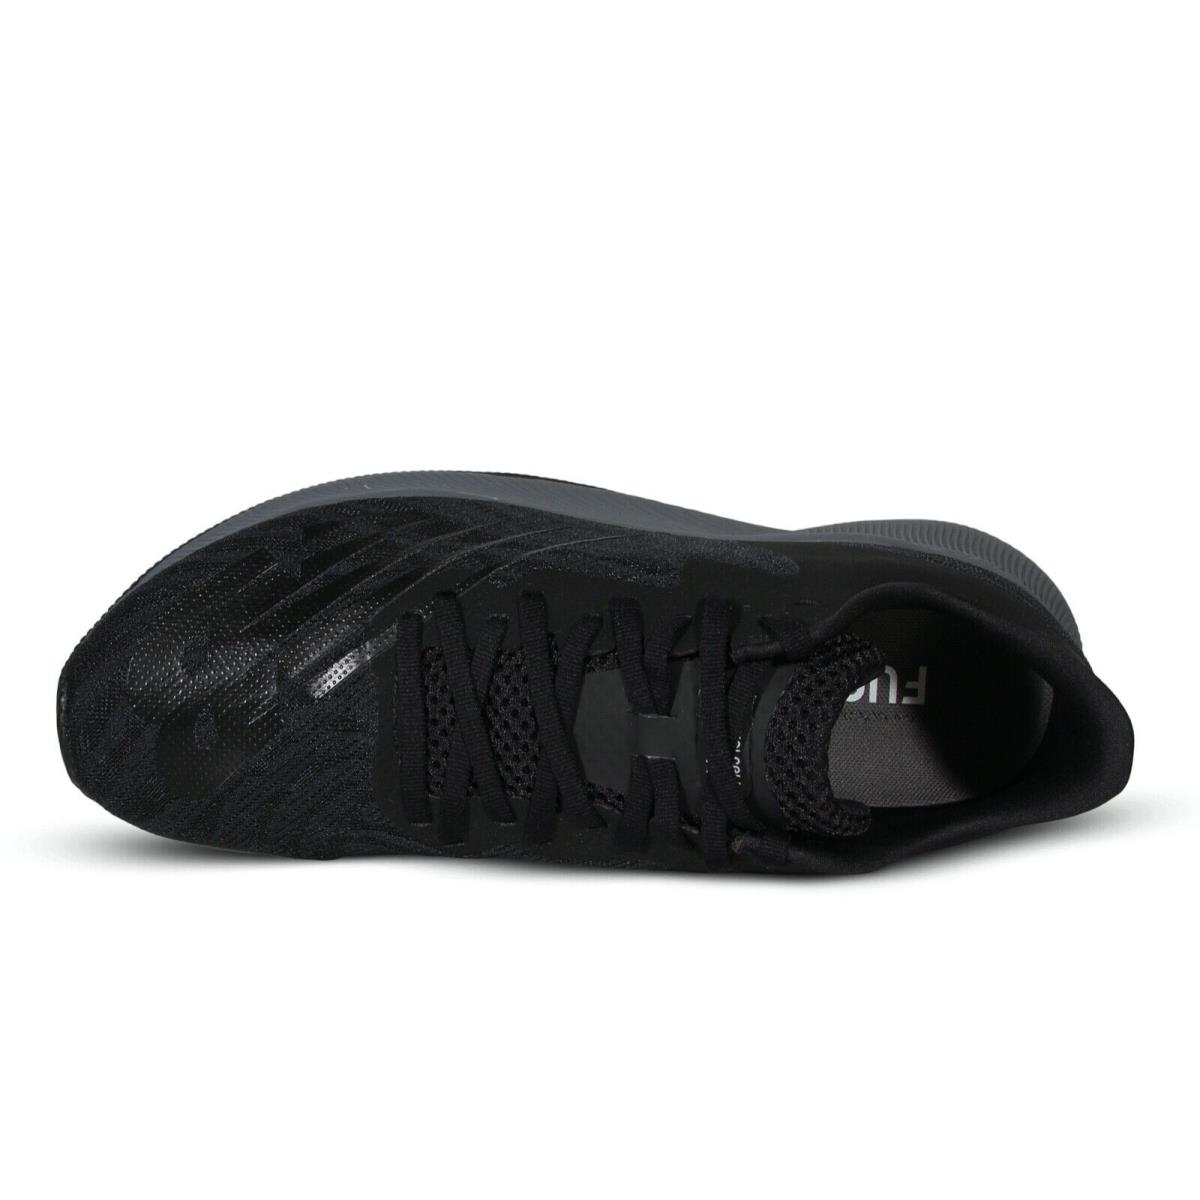 New Balance shoes FuelCell Prism - Black 4